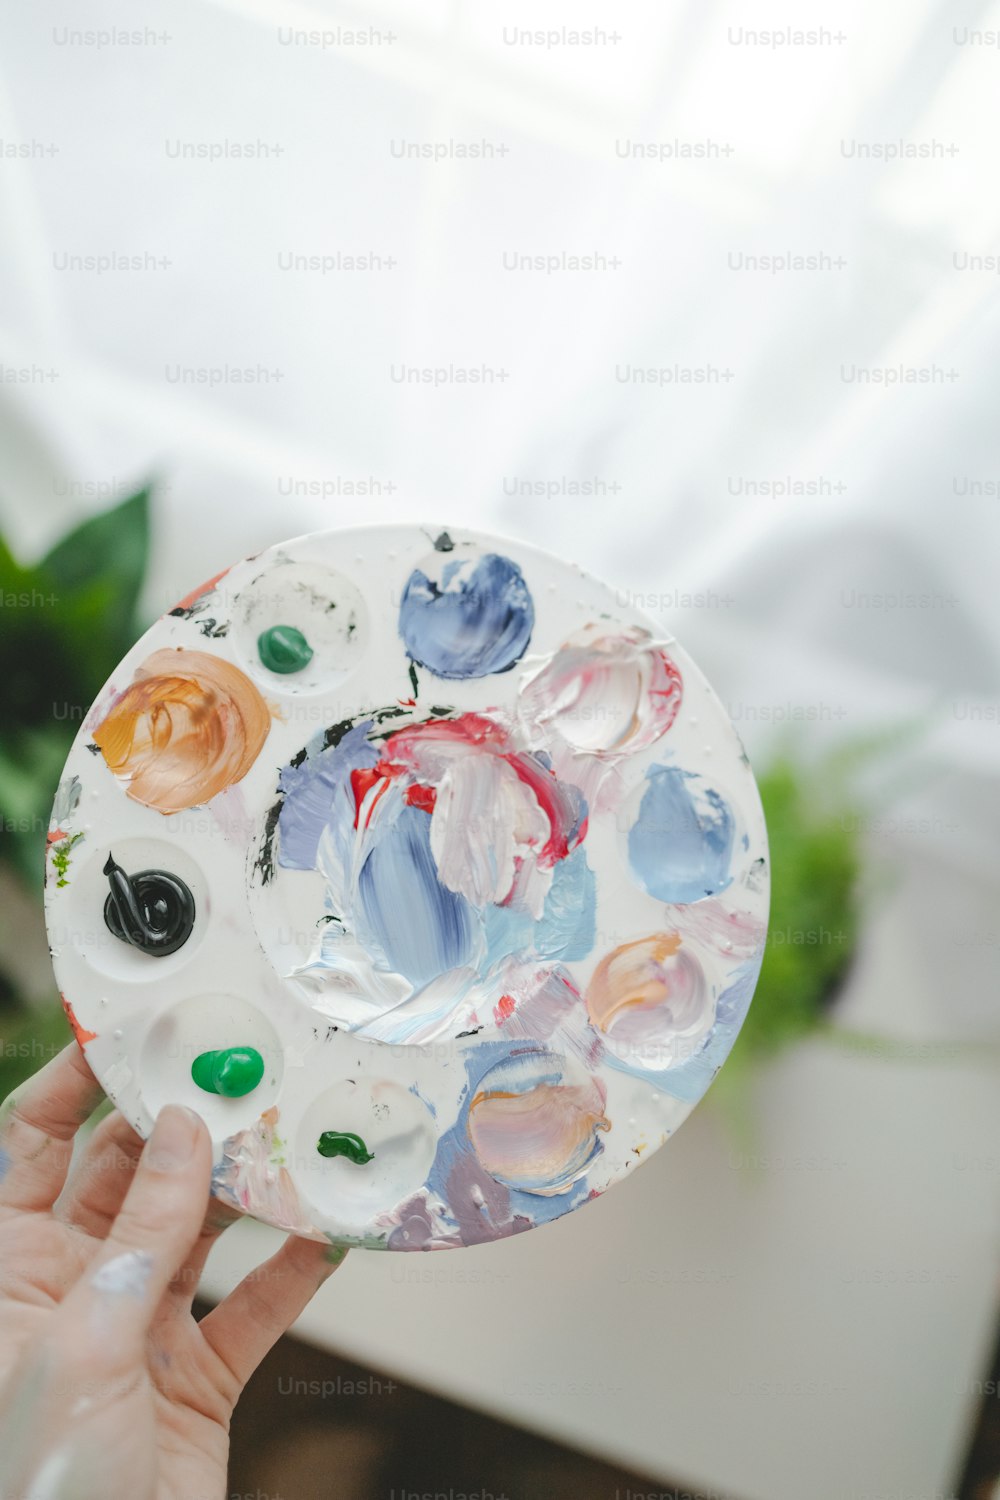 a person holding a plate with paint on it